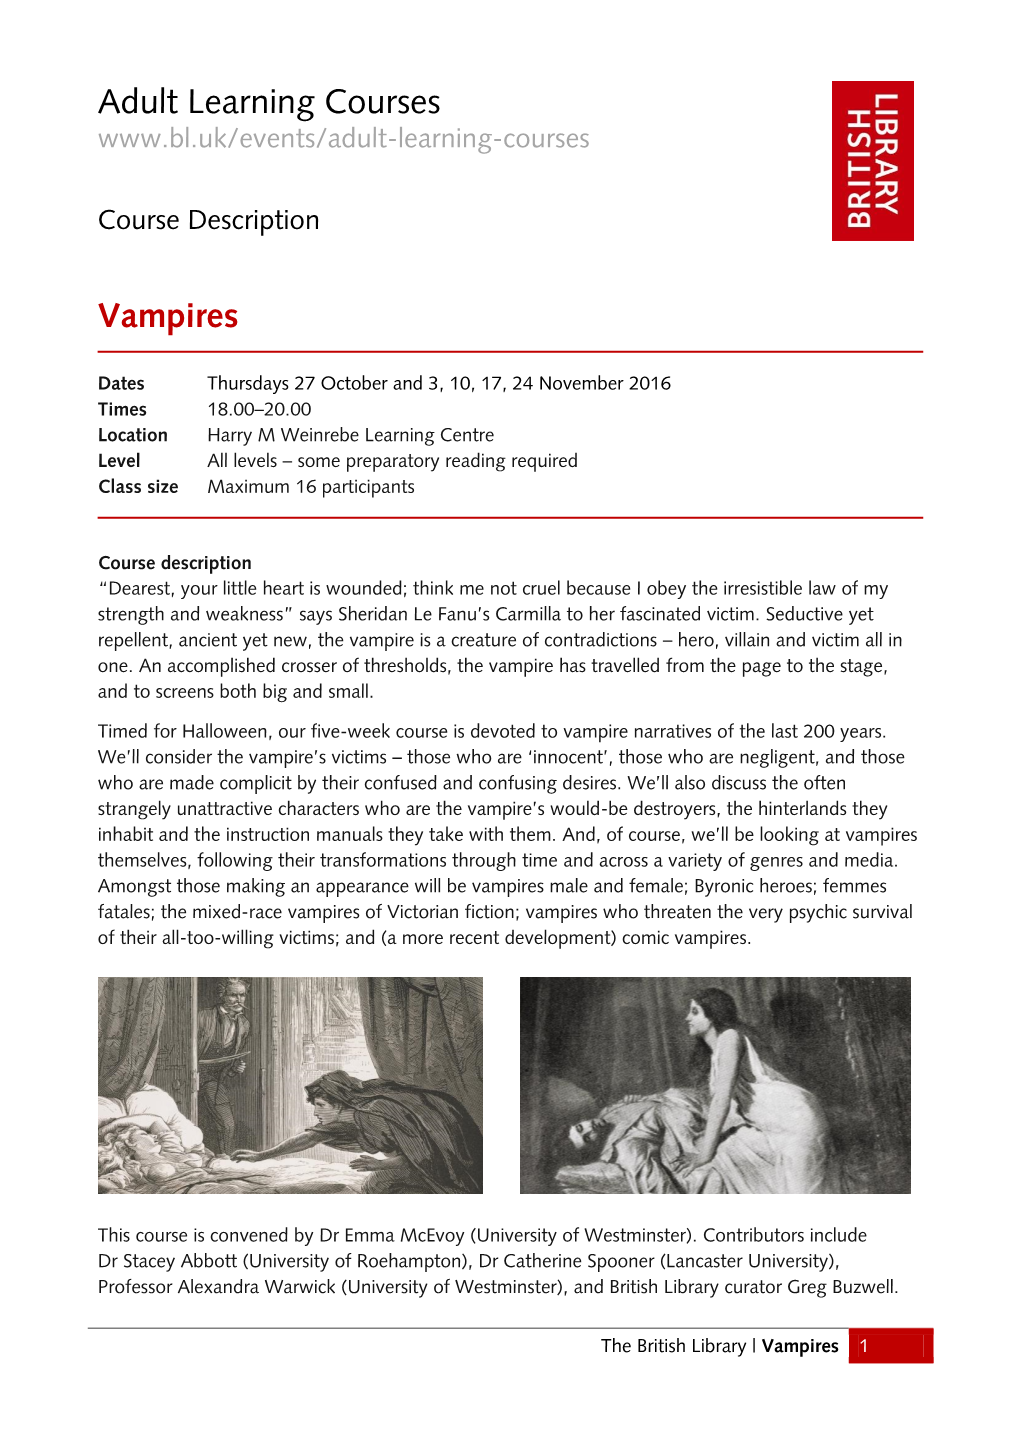 Adult Learning Courses Vampires